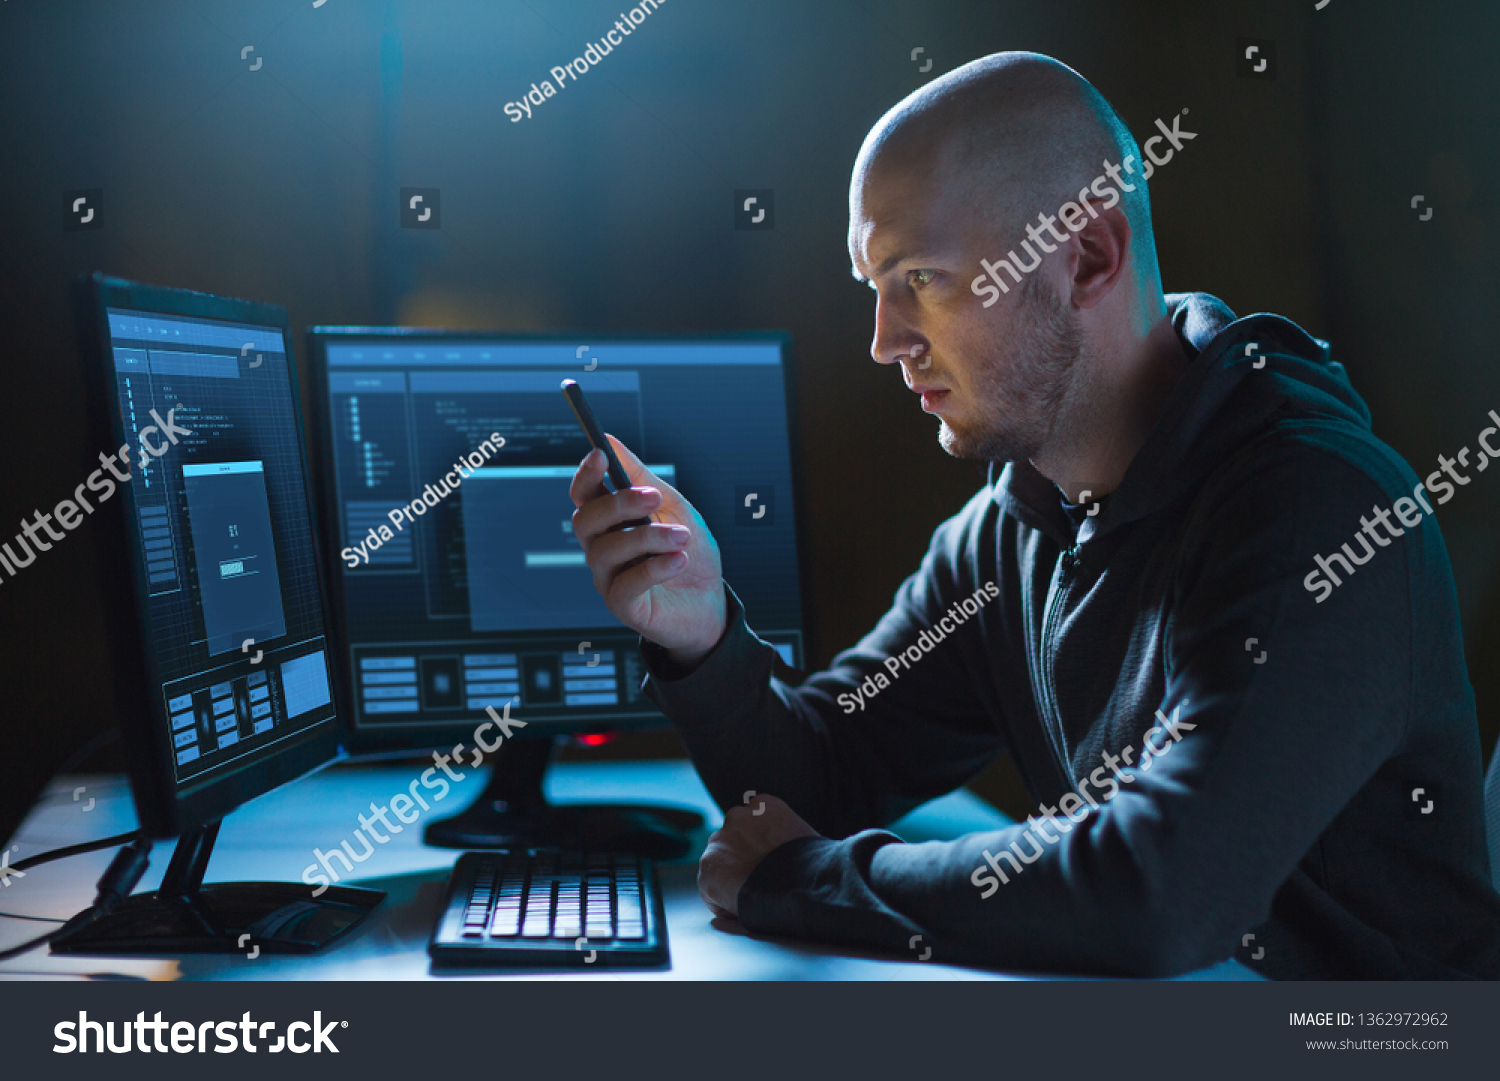 cybercrime, hacking and technology concept - male hacker with smartphone and progress loading bar on computer's screens in dark room #1362972962